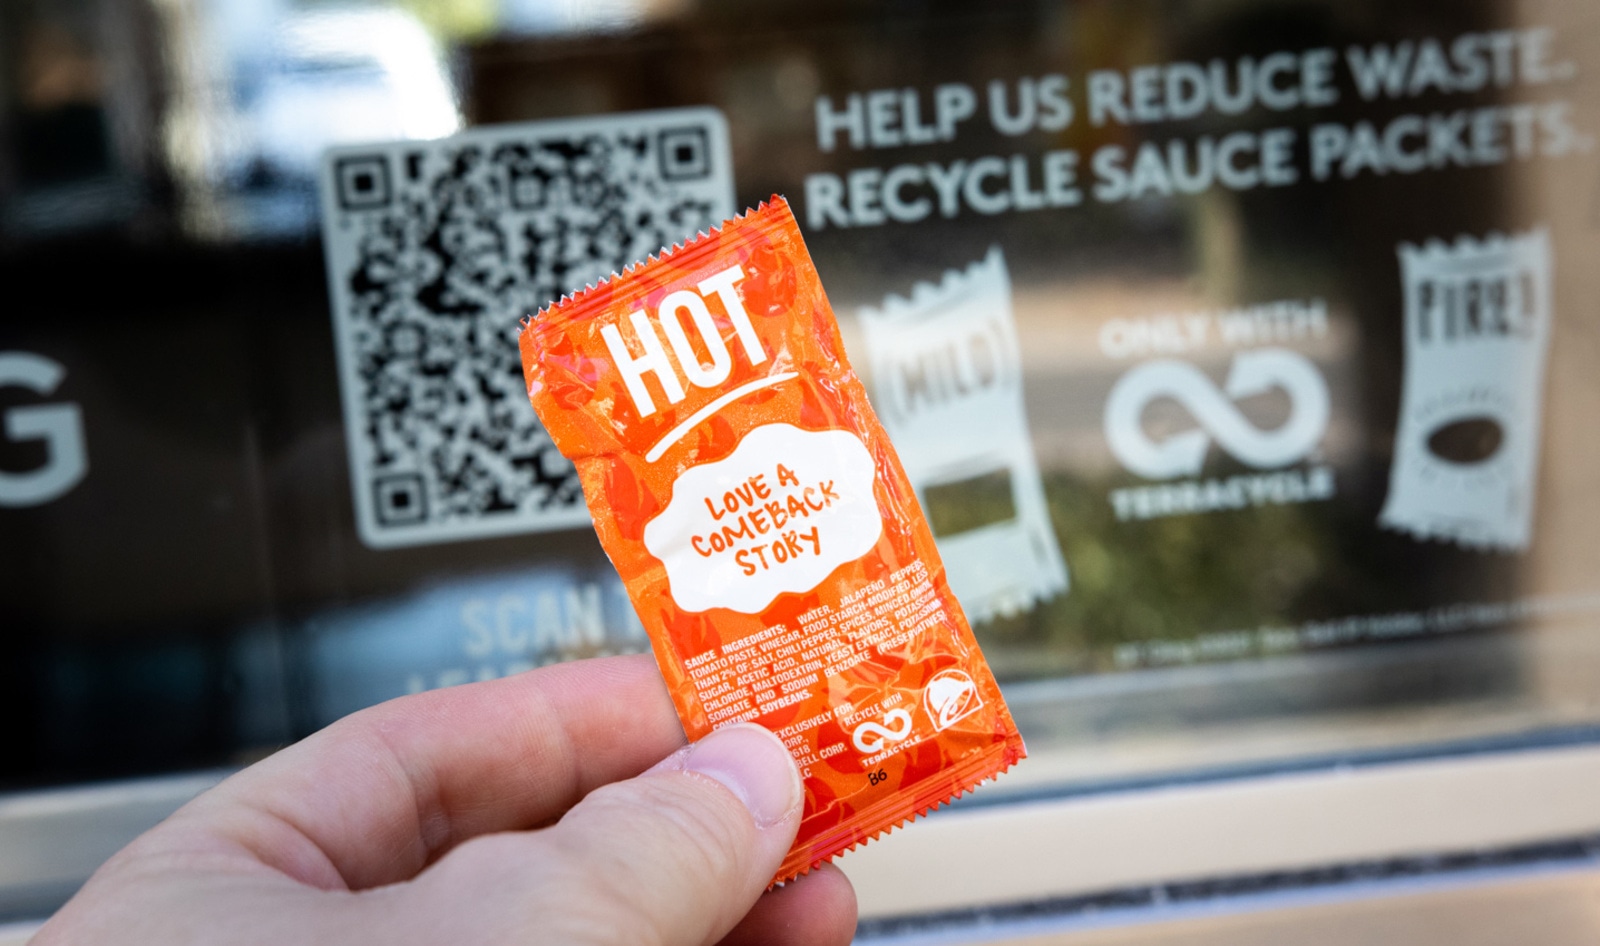 Taco Bell's New Recycling Program Aims to Keep 8.2 Billion Hot Sauce Packets Out of Landfills